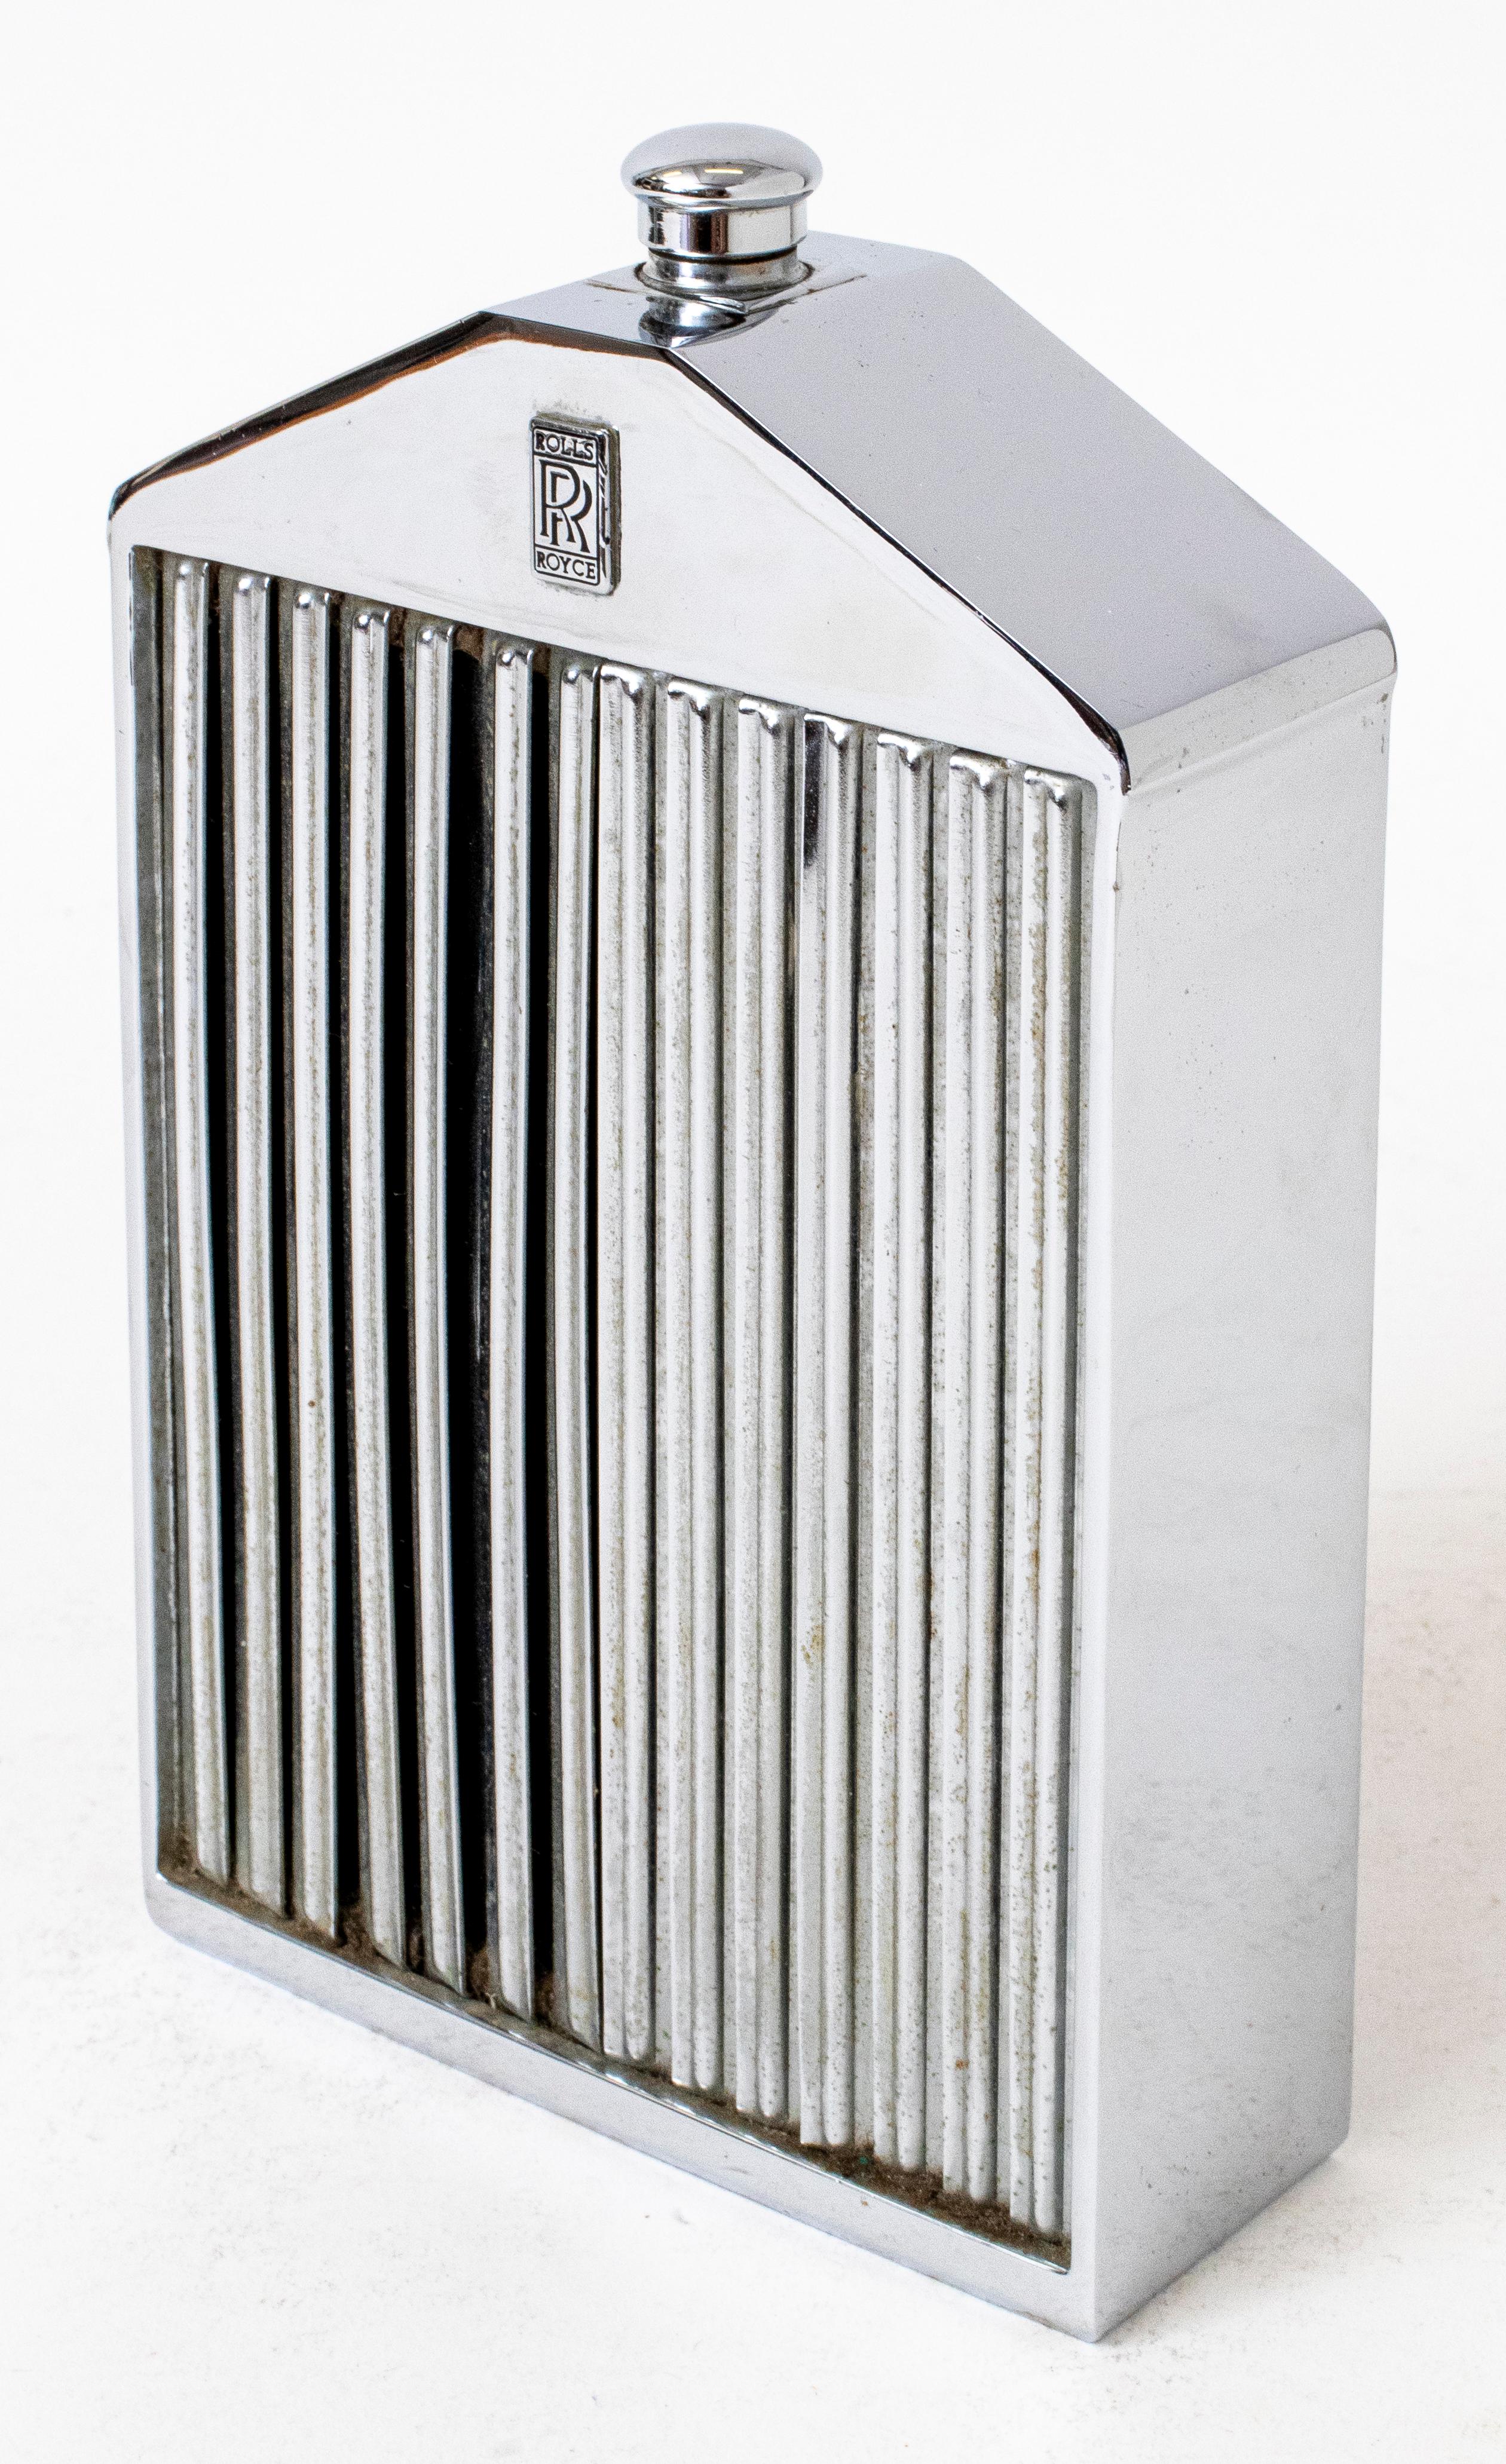 Mid Century chrome plate over metal Rolls Royce radiator grill with glass decanter. Authentic badge made in limited editions. Manufactured in England by Ruddspeed. Marked 